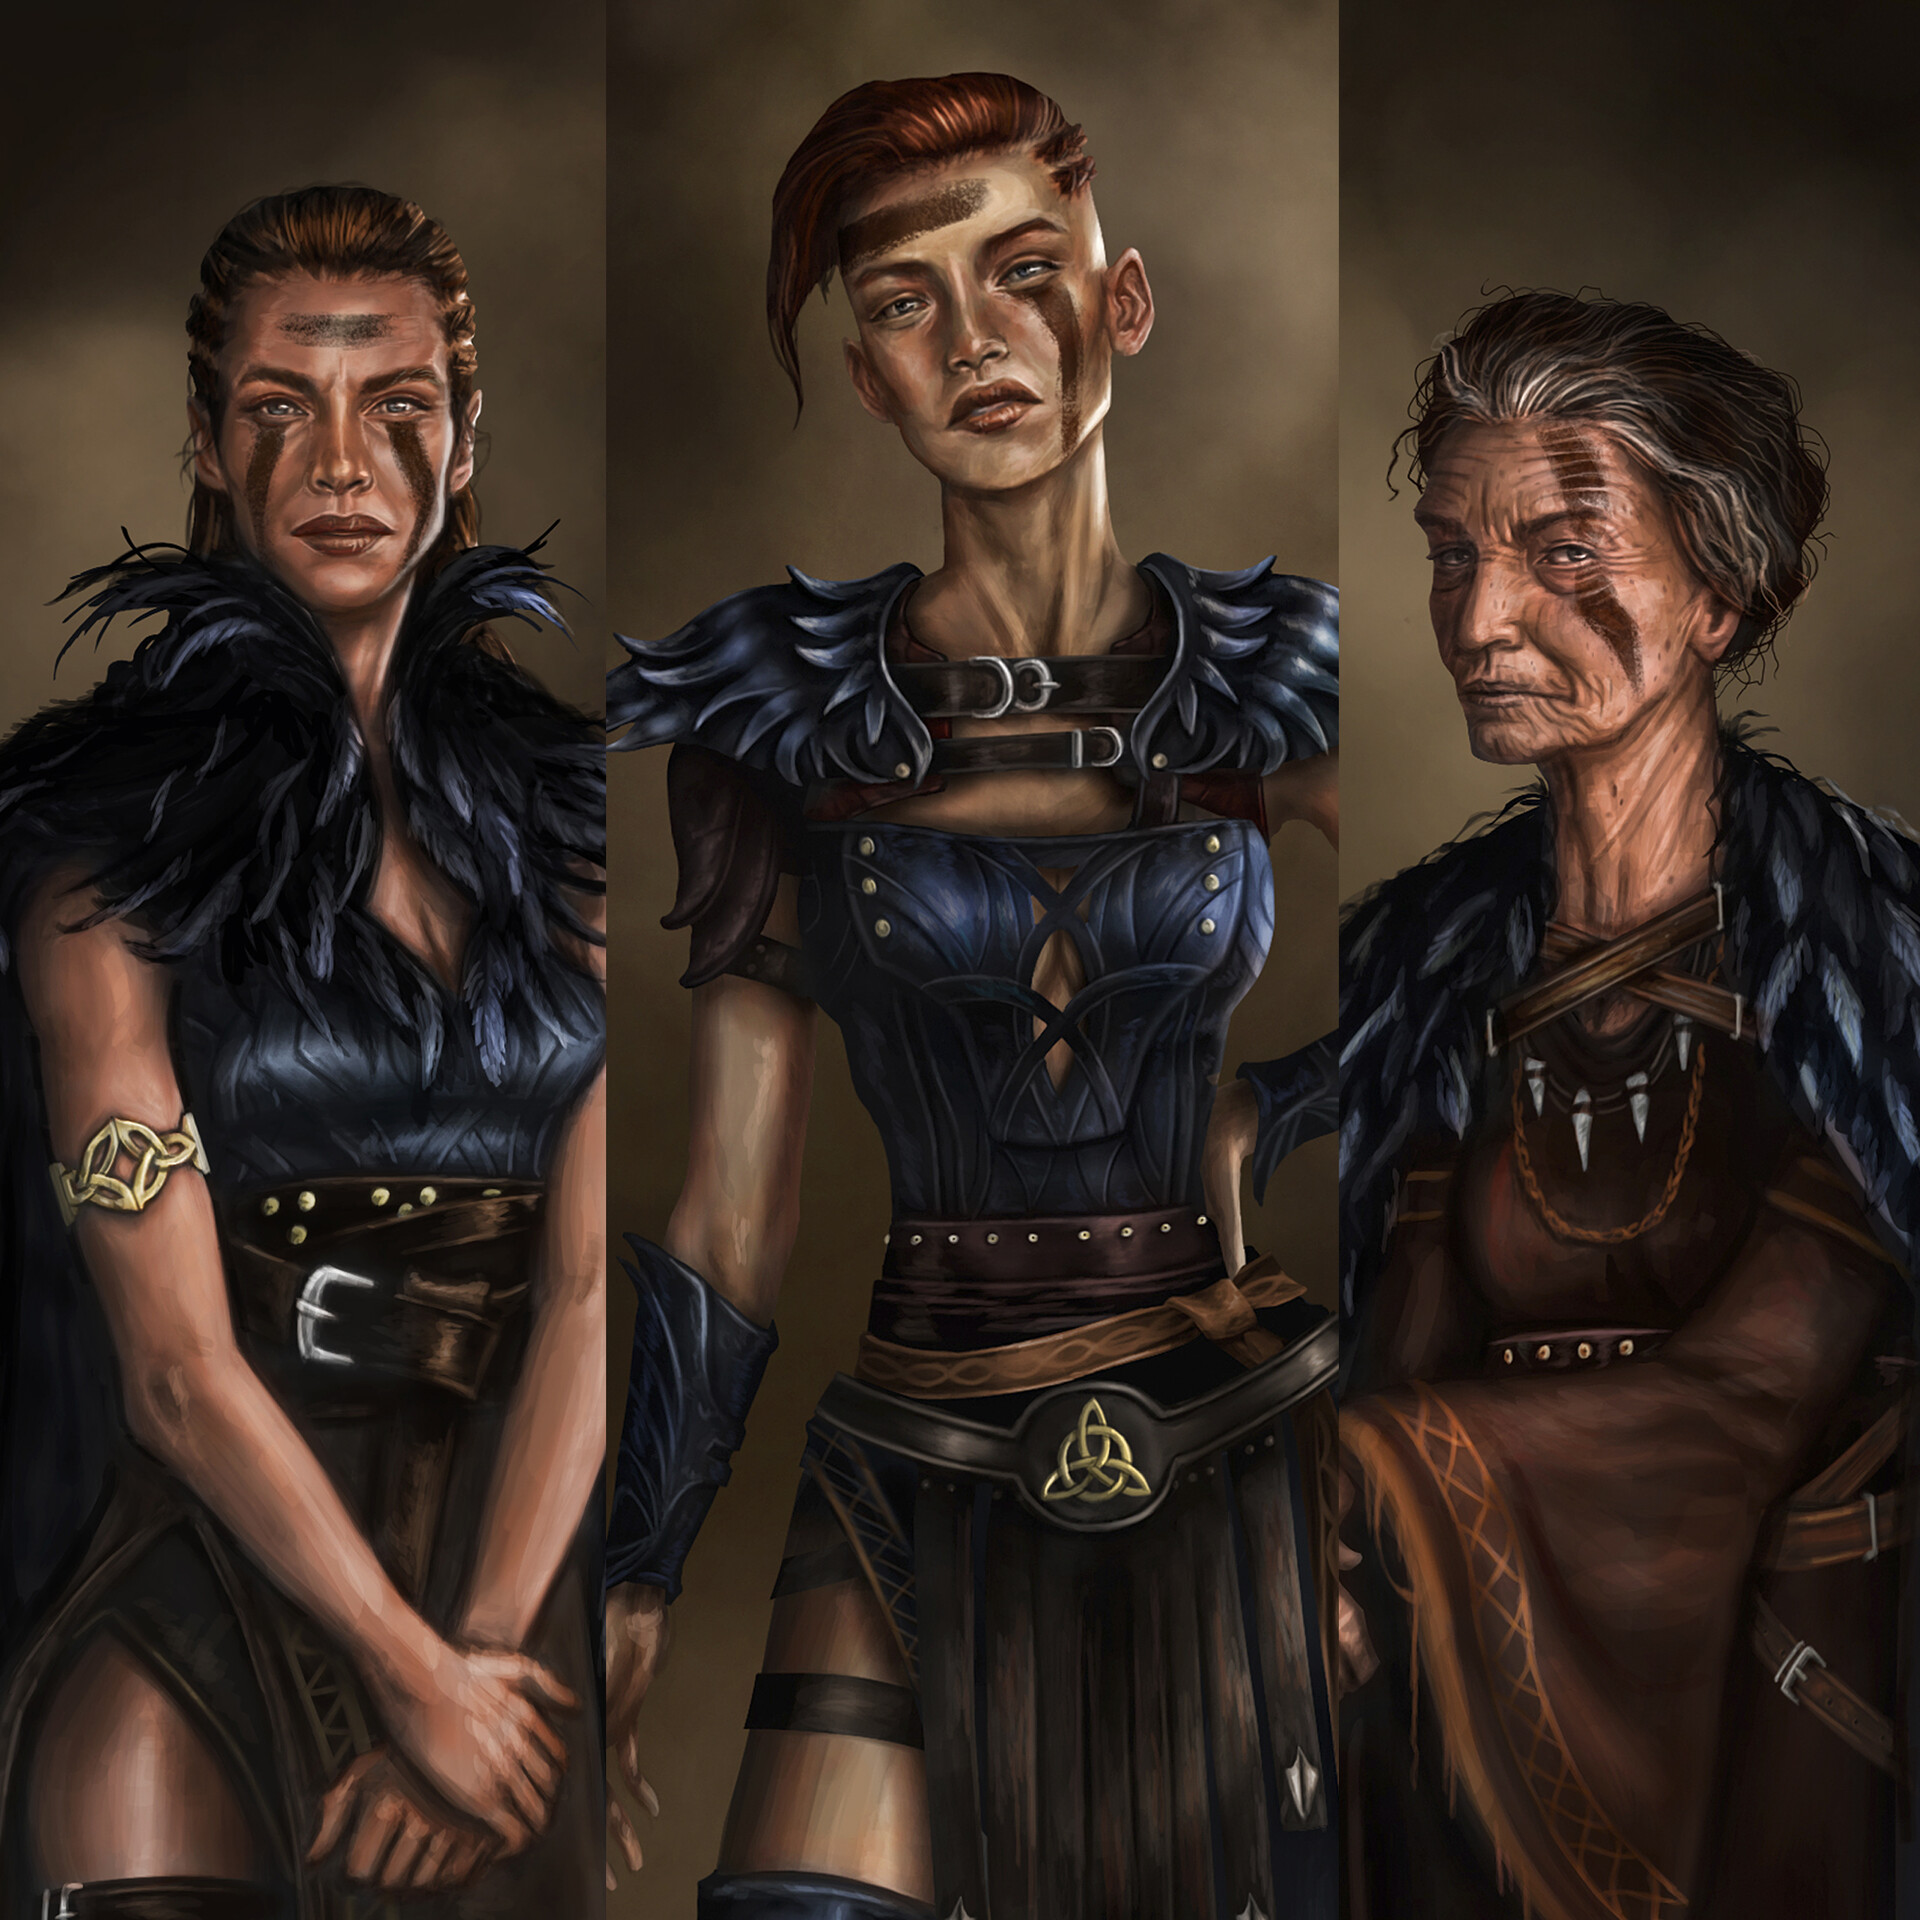 Three different versions of the same red haired woman. One is a young adult who looks ready for battle in Celtic blue Celtic armor, one looks as if the battle has passed with short hair and dramatic face paint, the other is an old woman with similar face paint but not in armor. 